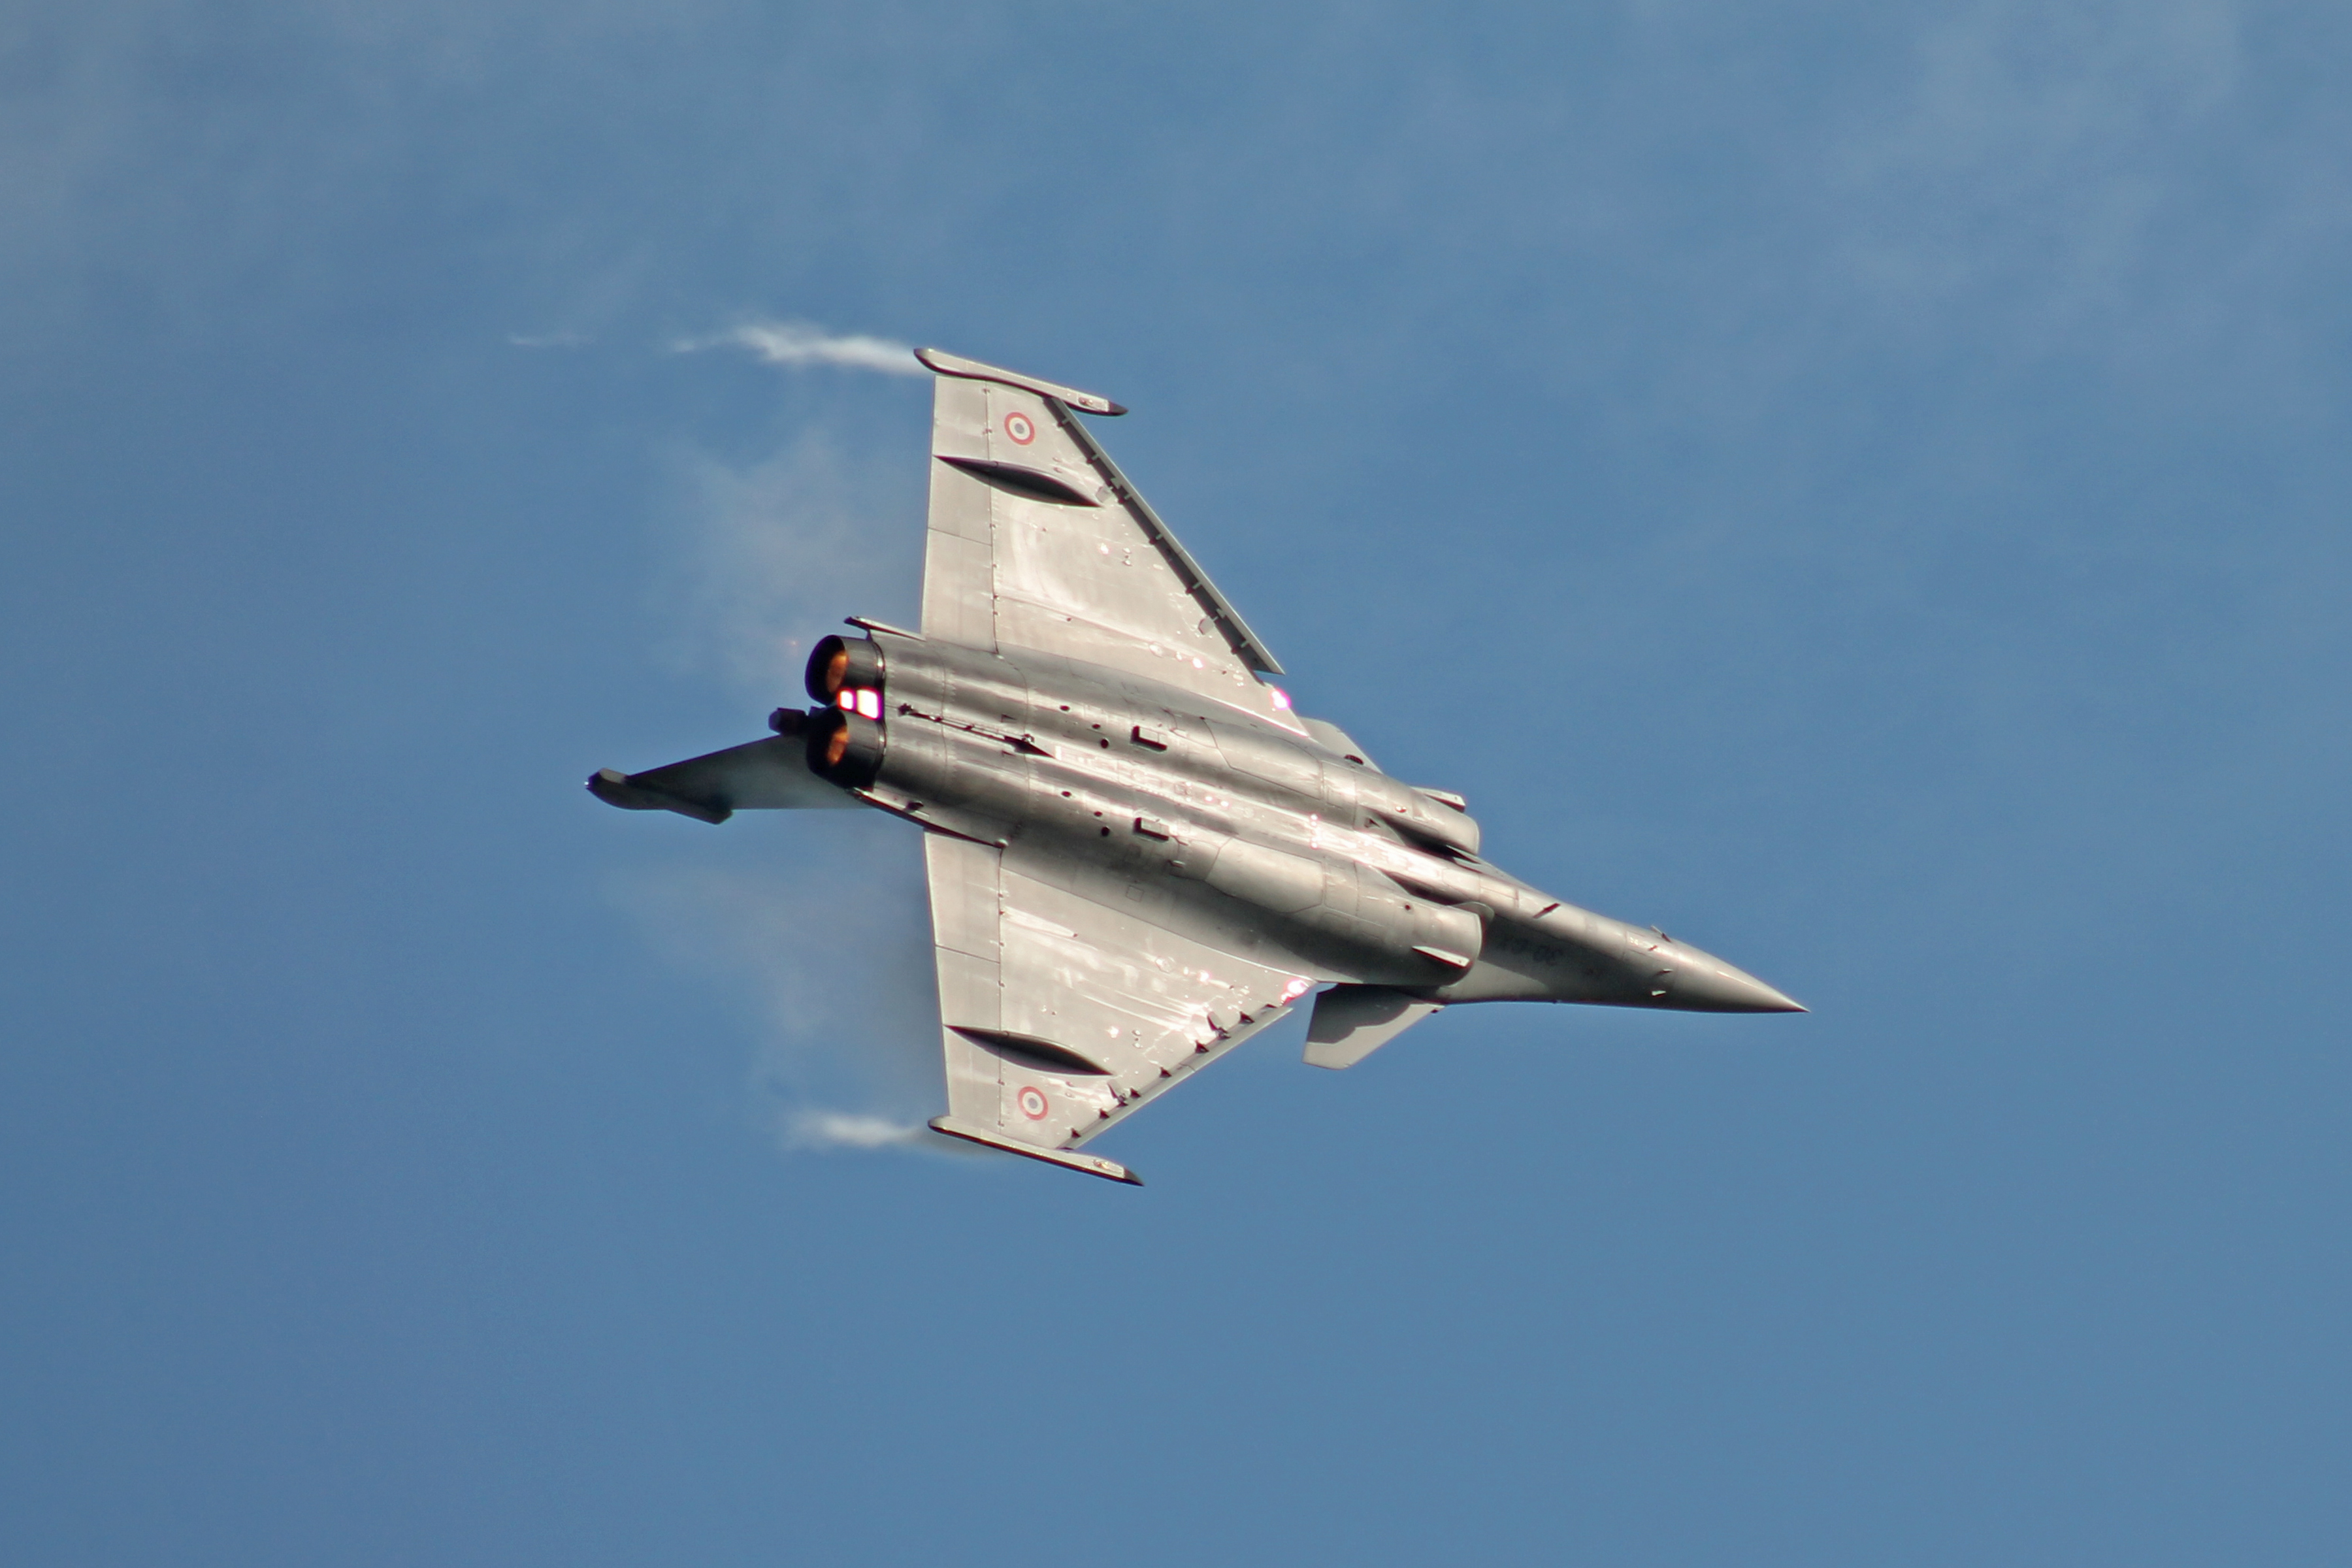 Rafale C from the Rafale Solo Display